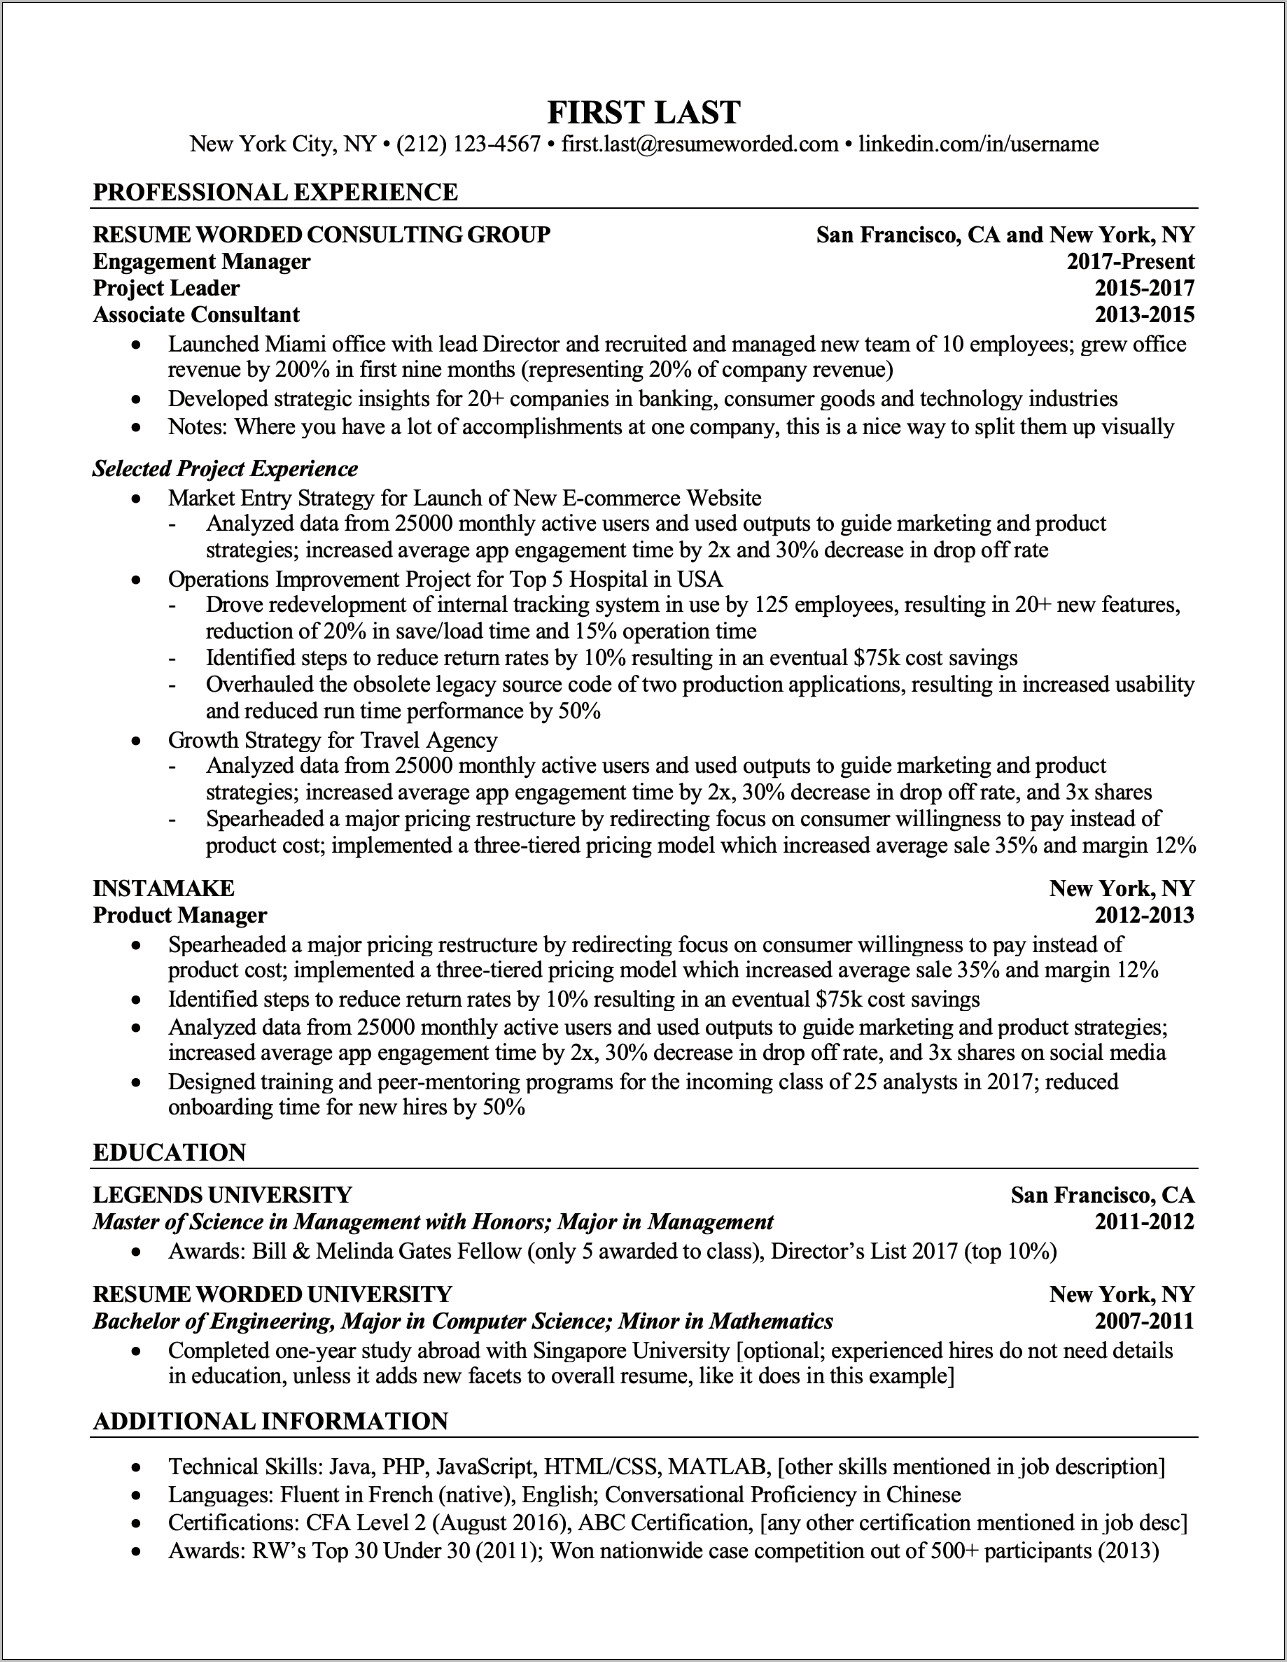 List High School Competitions On First Graduate Resume